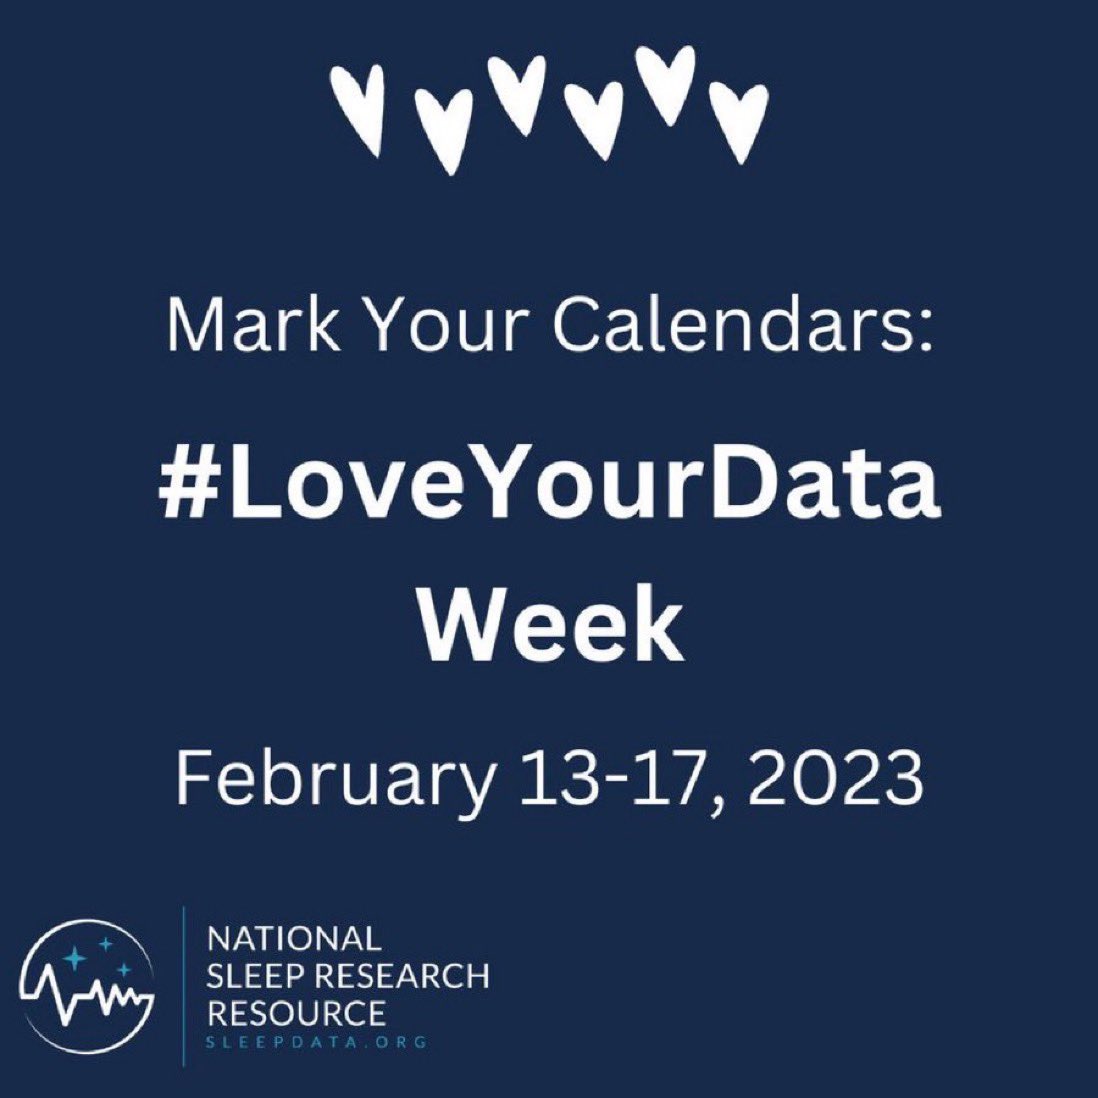 Have you heard? Tomorrow kicks off #LoveYourData week! We are so excited to celebrate #SleepData this week. Keep an eye out for #NSRR #ScientistSpotlights, #DataSharing tips and more!